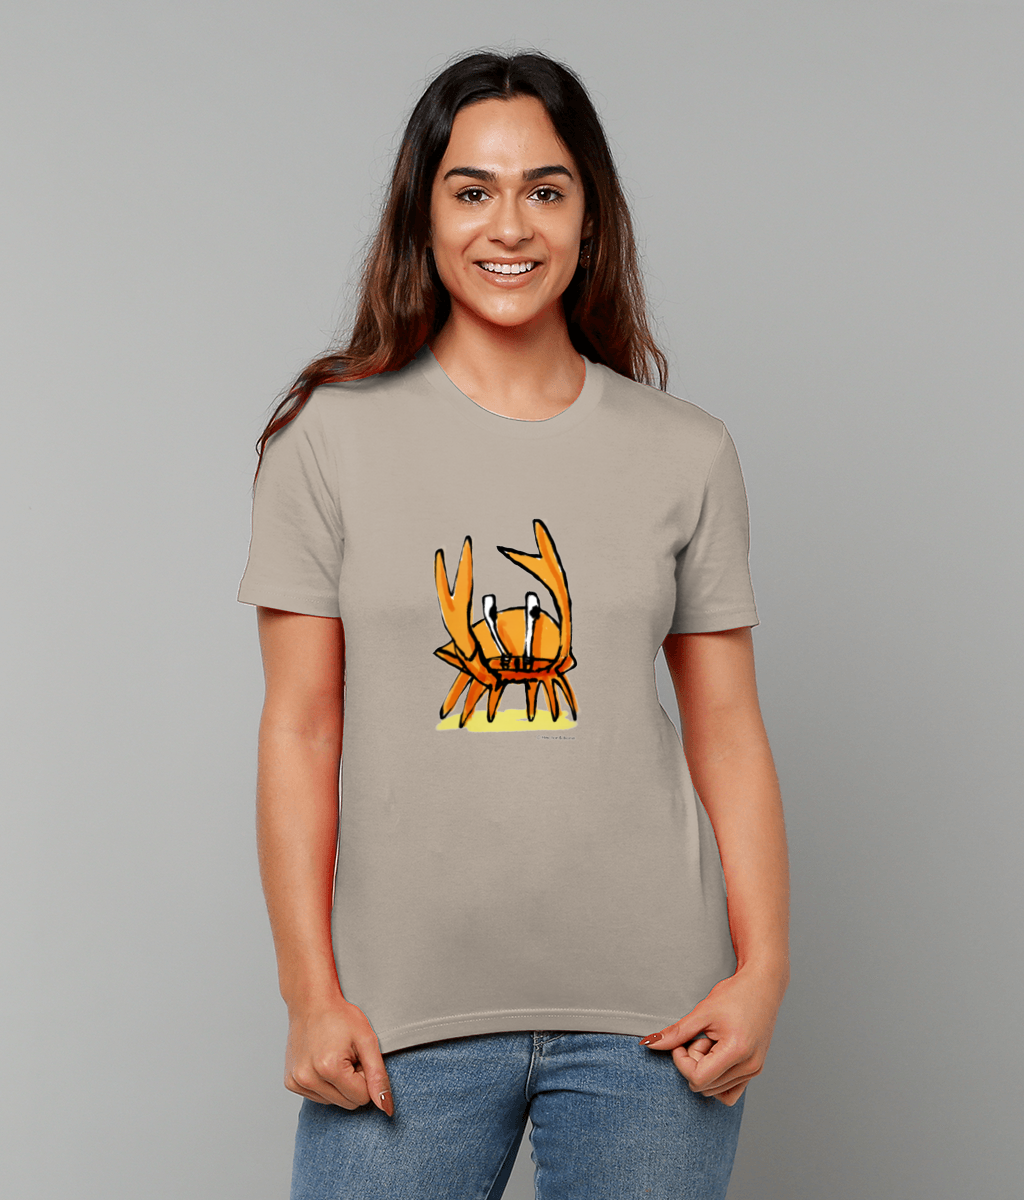 Crab T-shirt - Young woman wearing an illustrated funny Angry Crab t-shirt design on a dust colour vegan cotton t-shirts by Hector and Bone